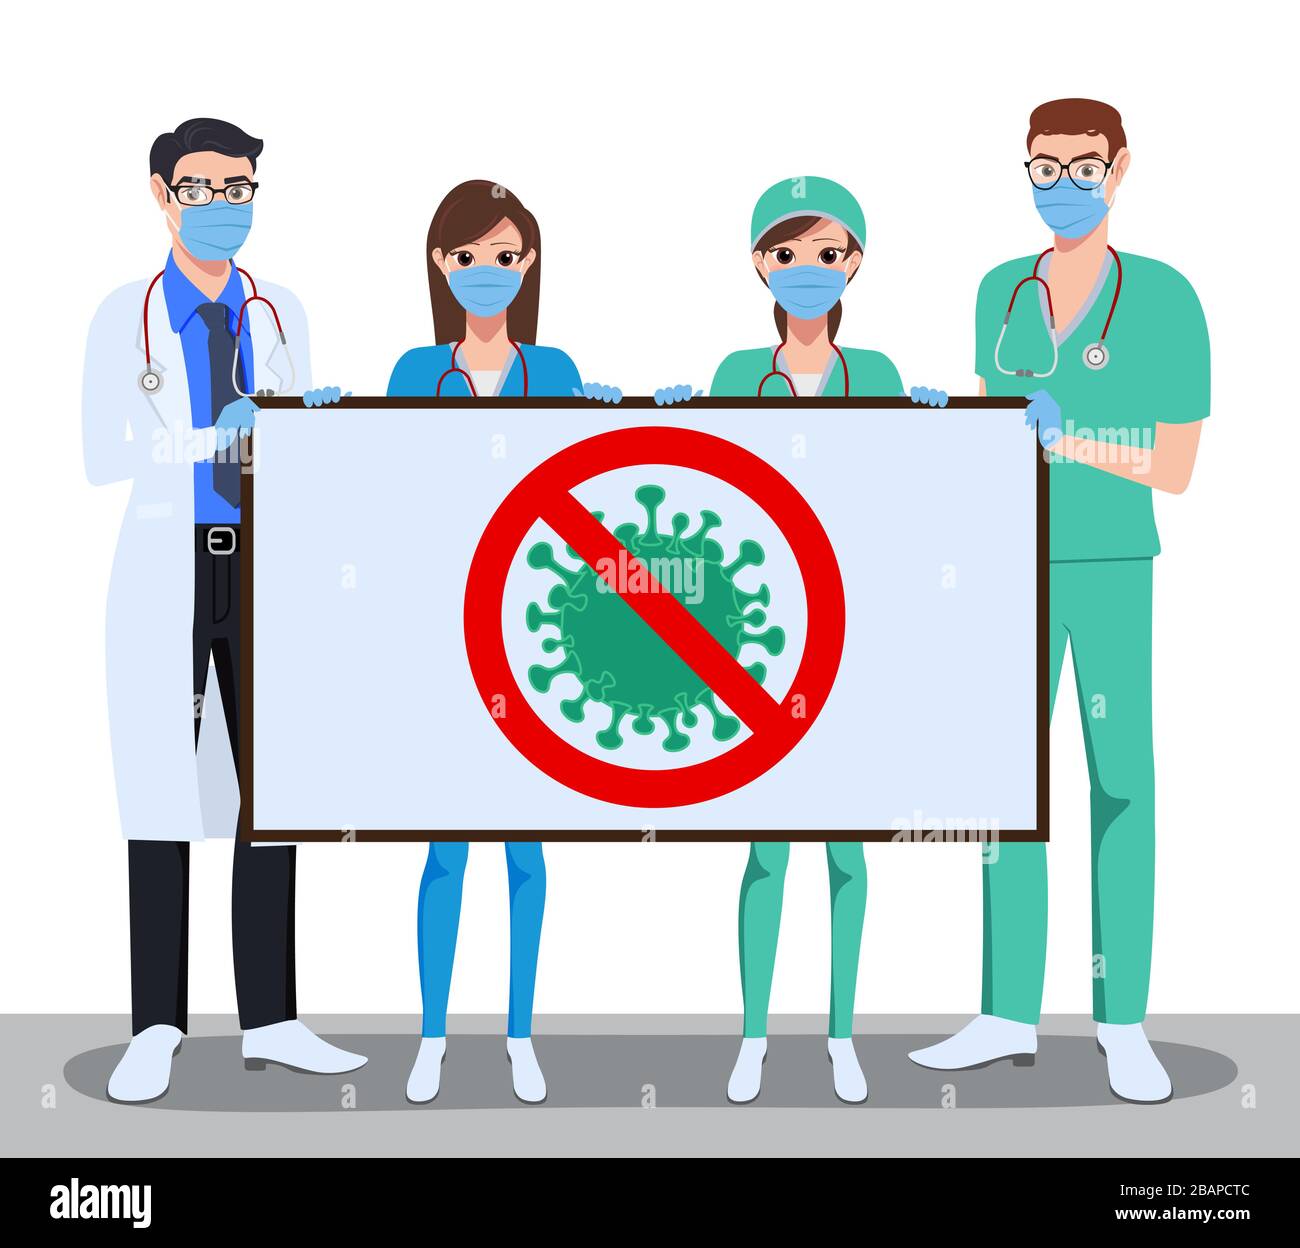 Medical front liners characters vector concept design. Medical team doctors and nurses character holding white board showing stop corona virus sign Stock Vector